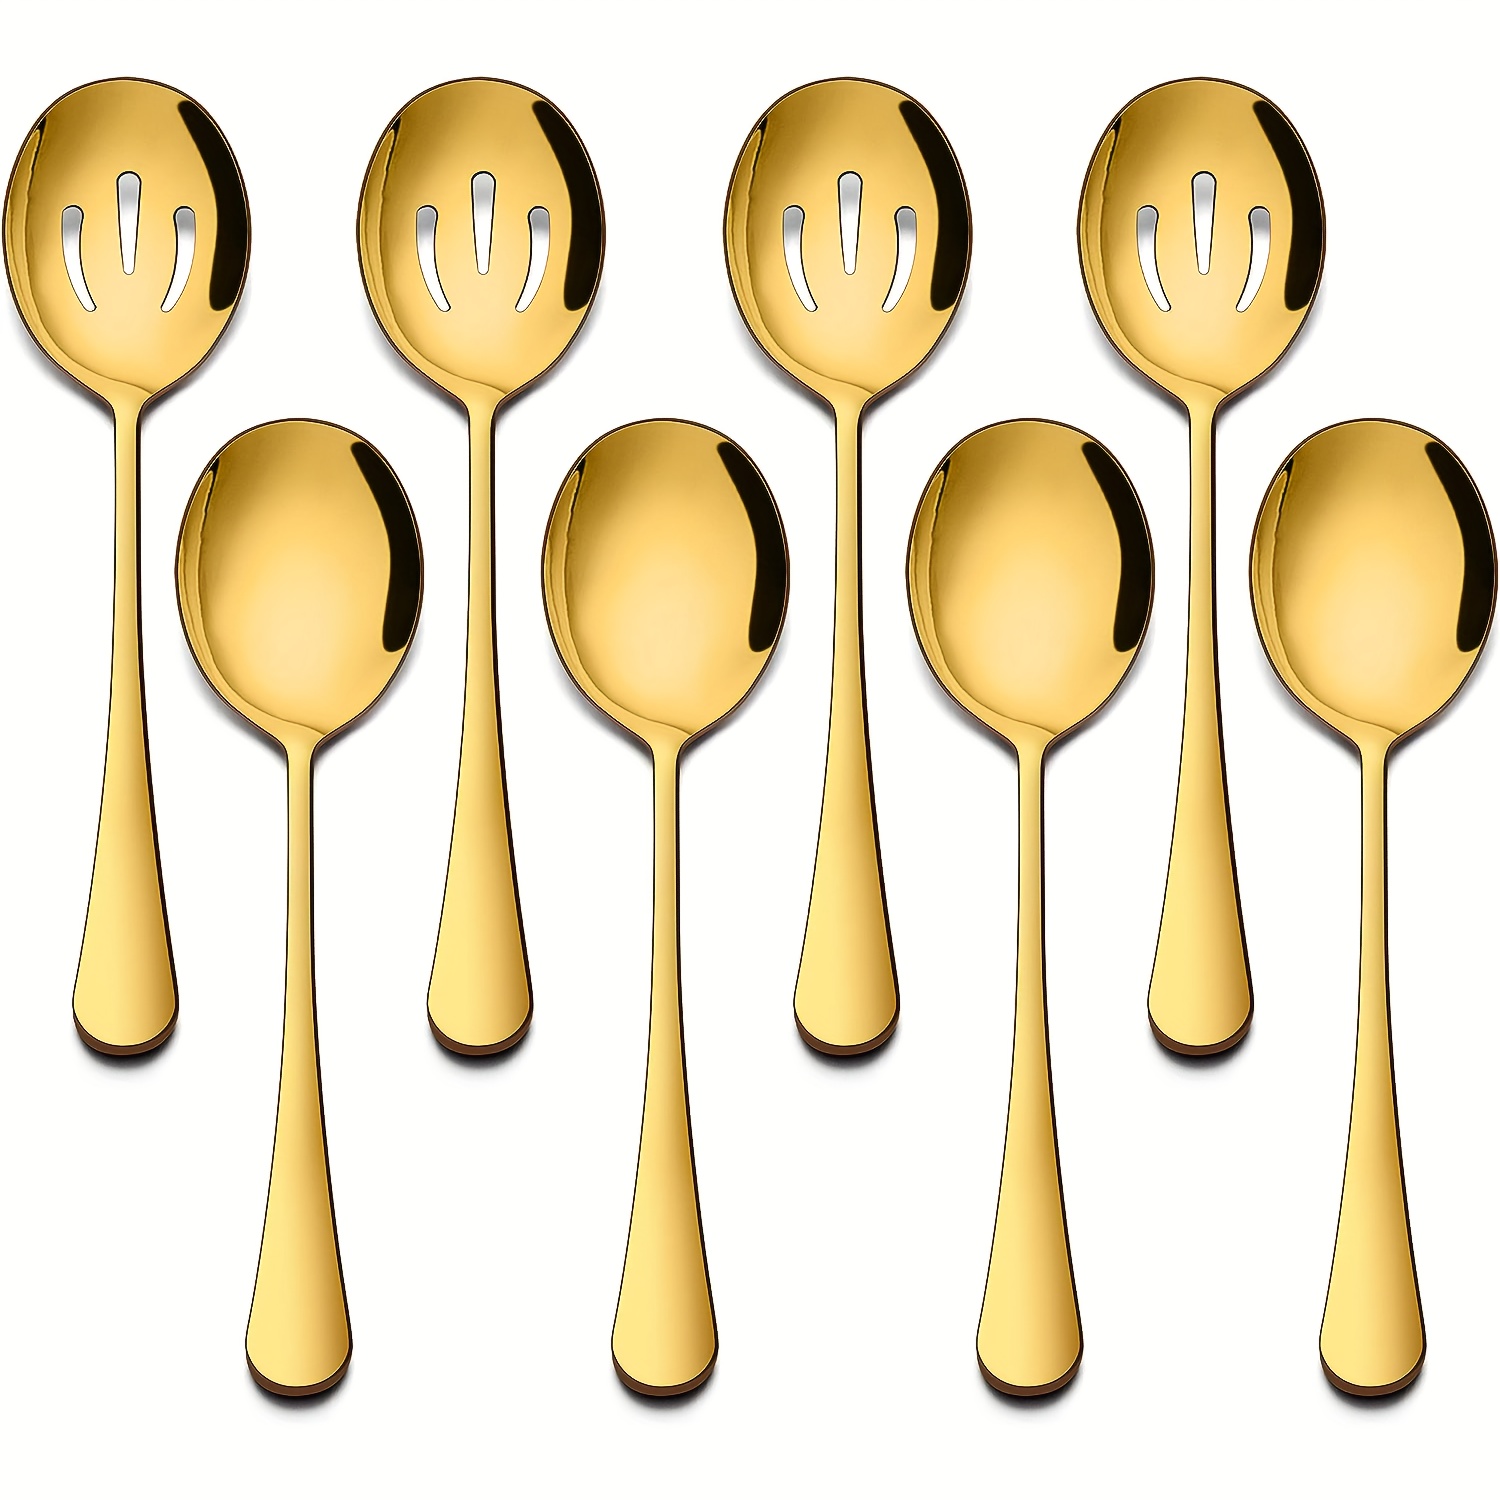 Bomgaars : South Bend Kast-A-Way Spoon, 3/8 OZ, Gold : Spoons